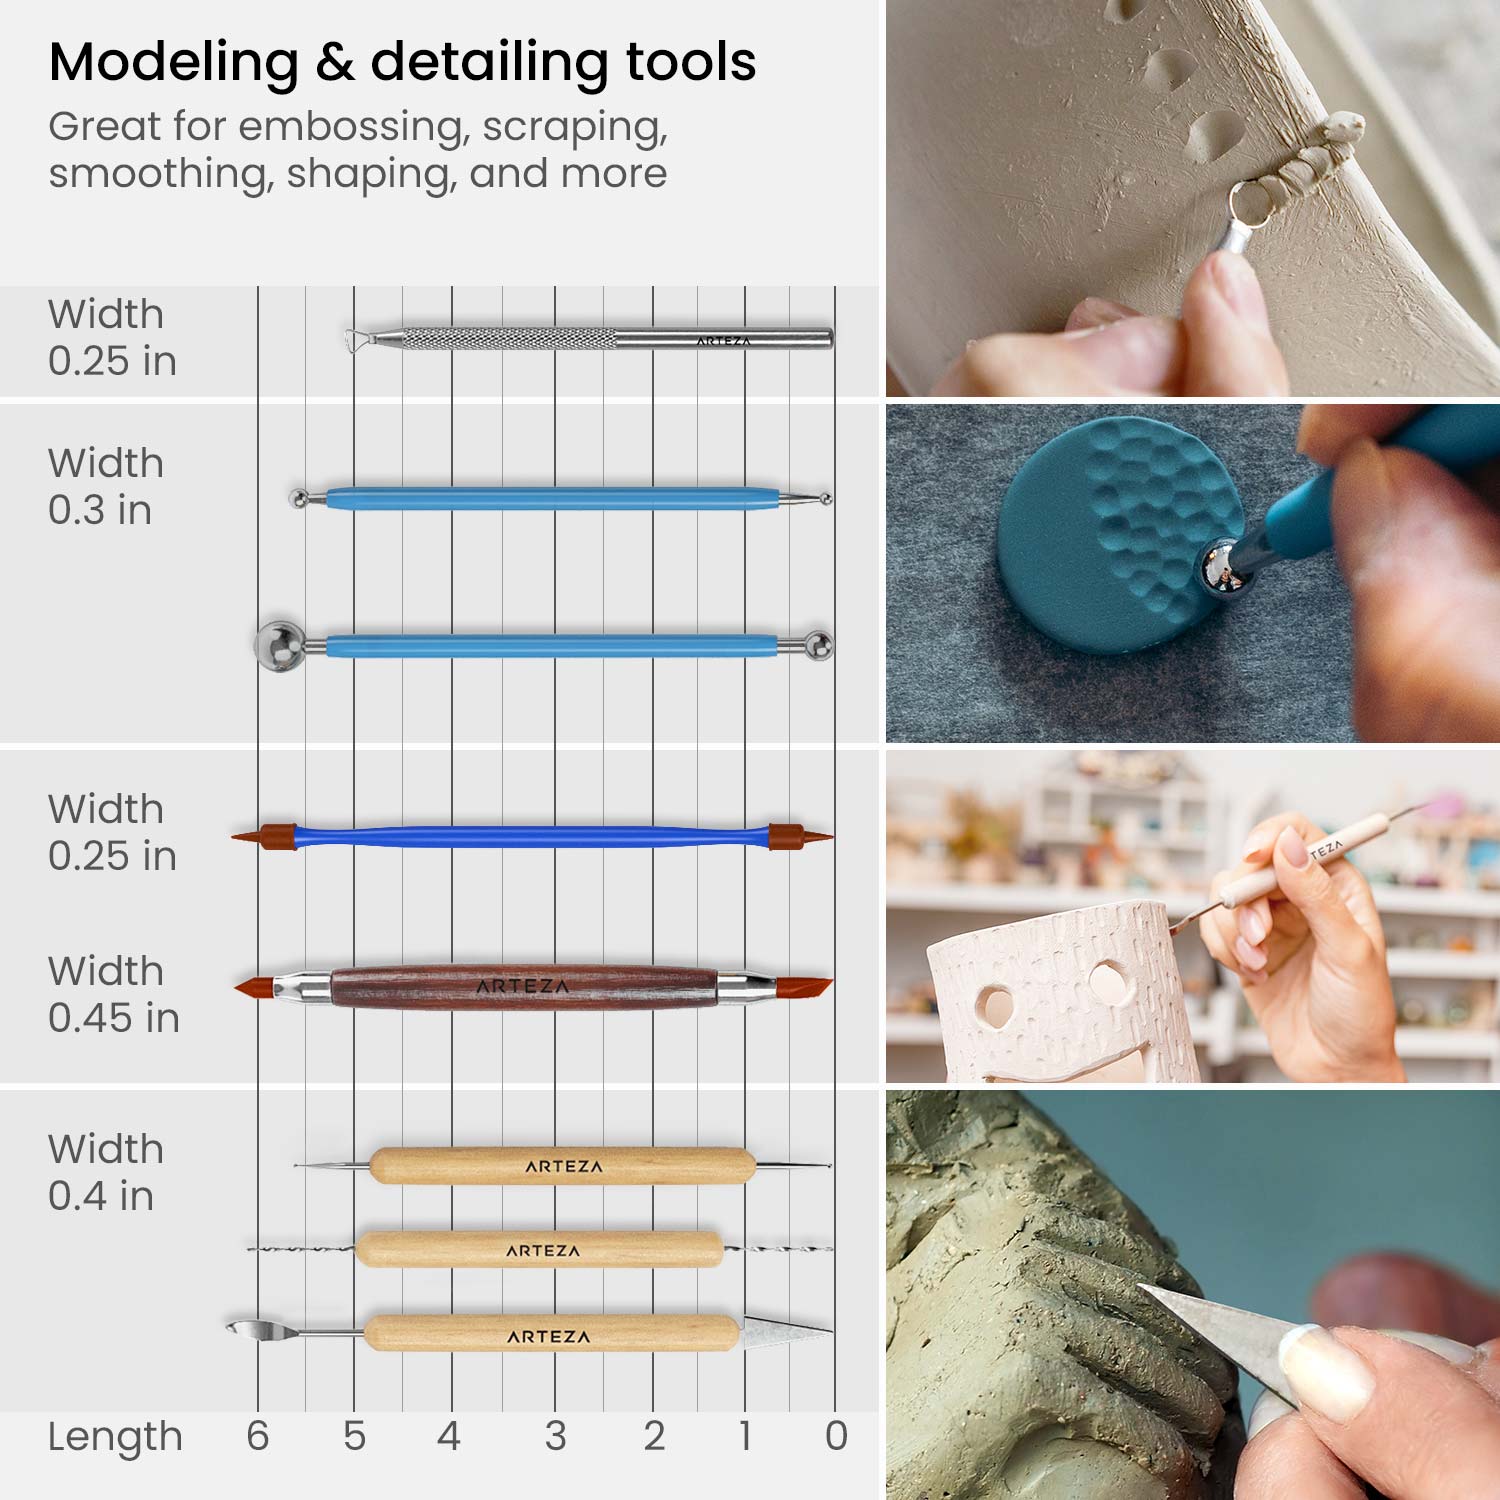 CHIZZLE: The Smart Sculpting Surface & Guide